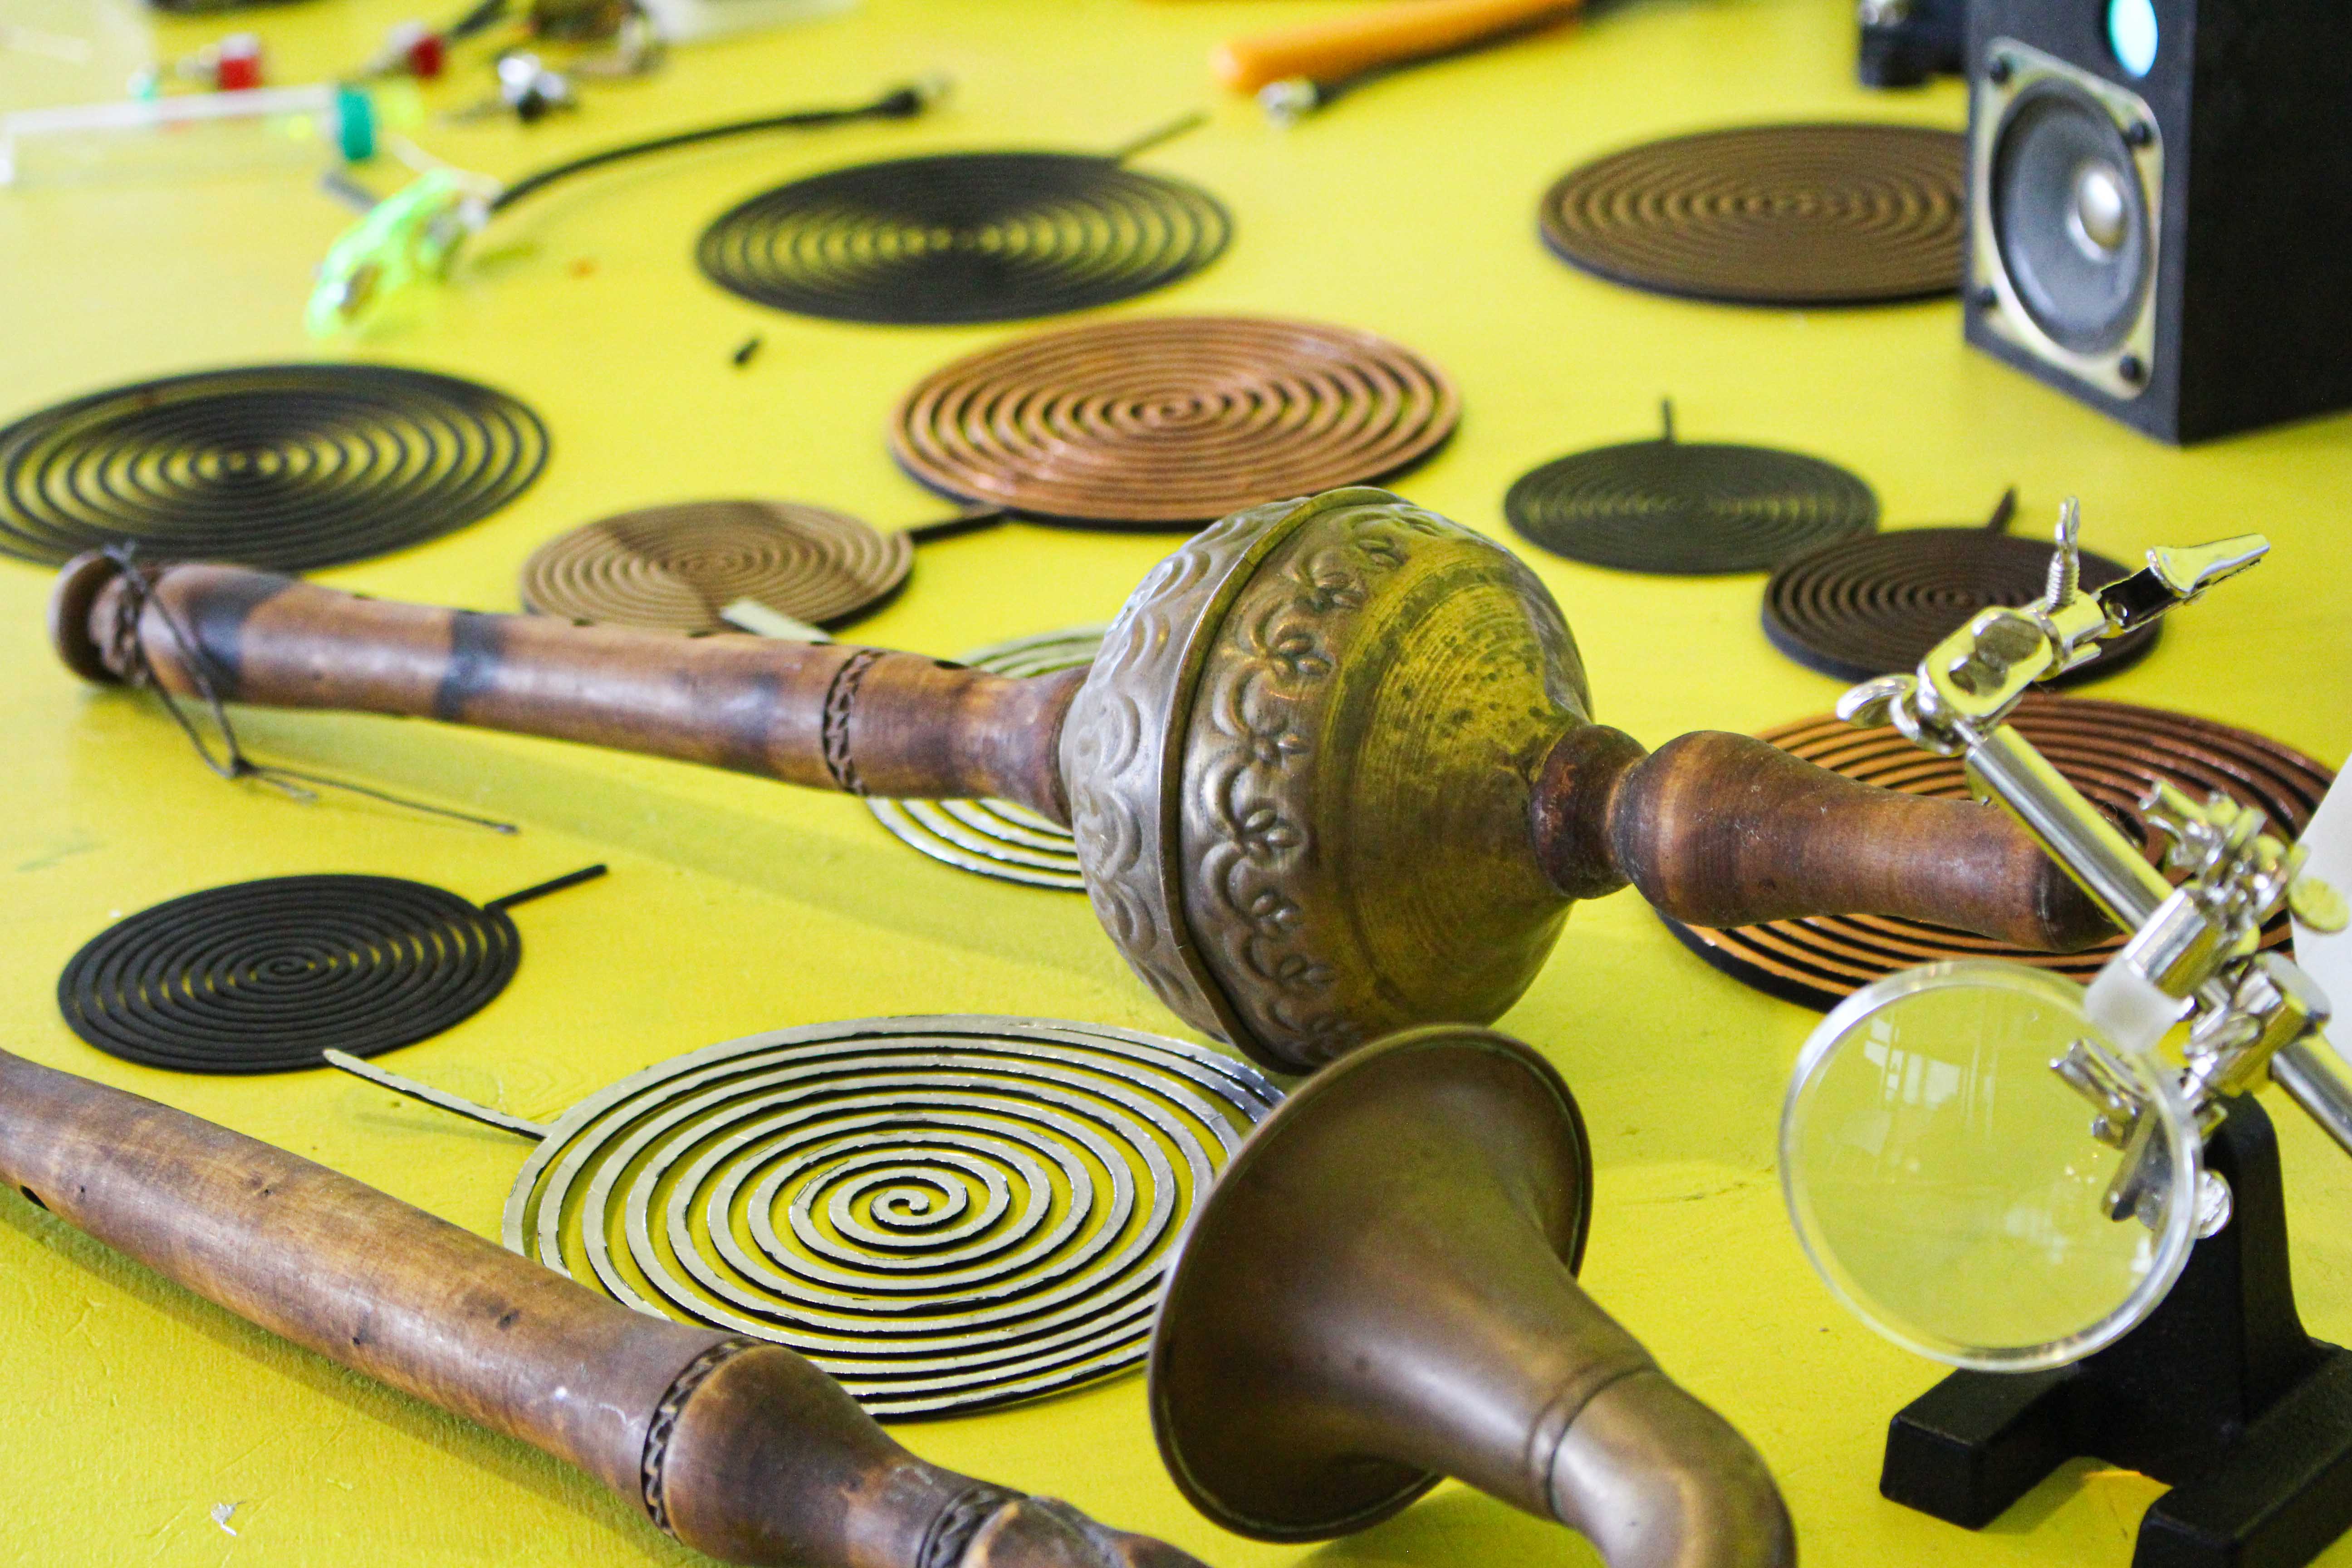 Many different types of instruments and instrumental parts, both acoustic and electronic, placed on a yellow surface.